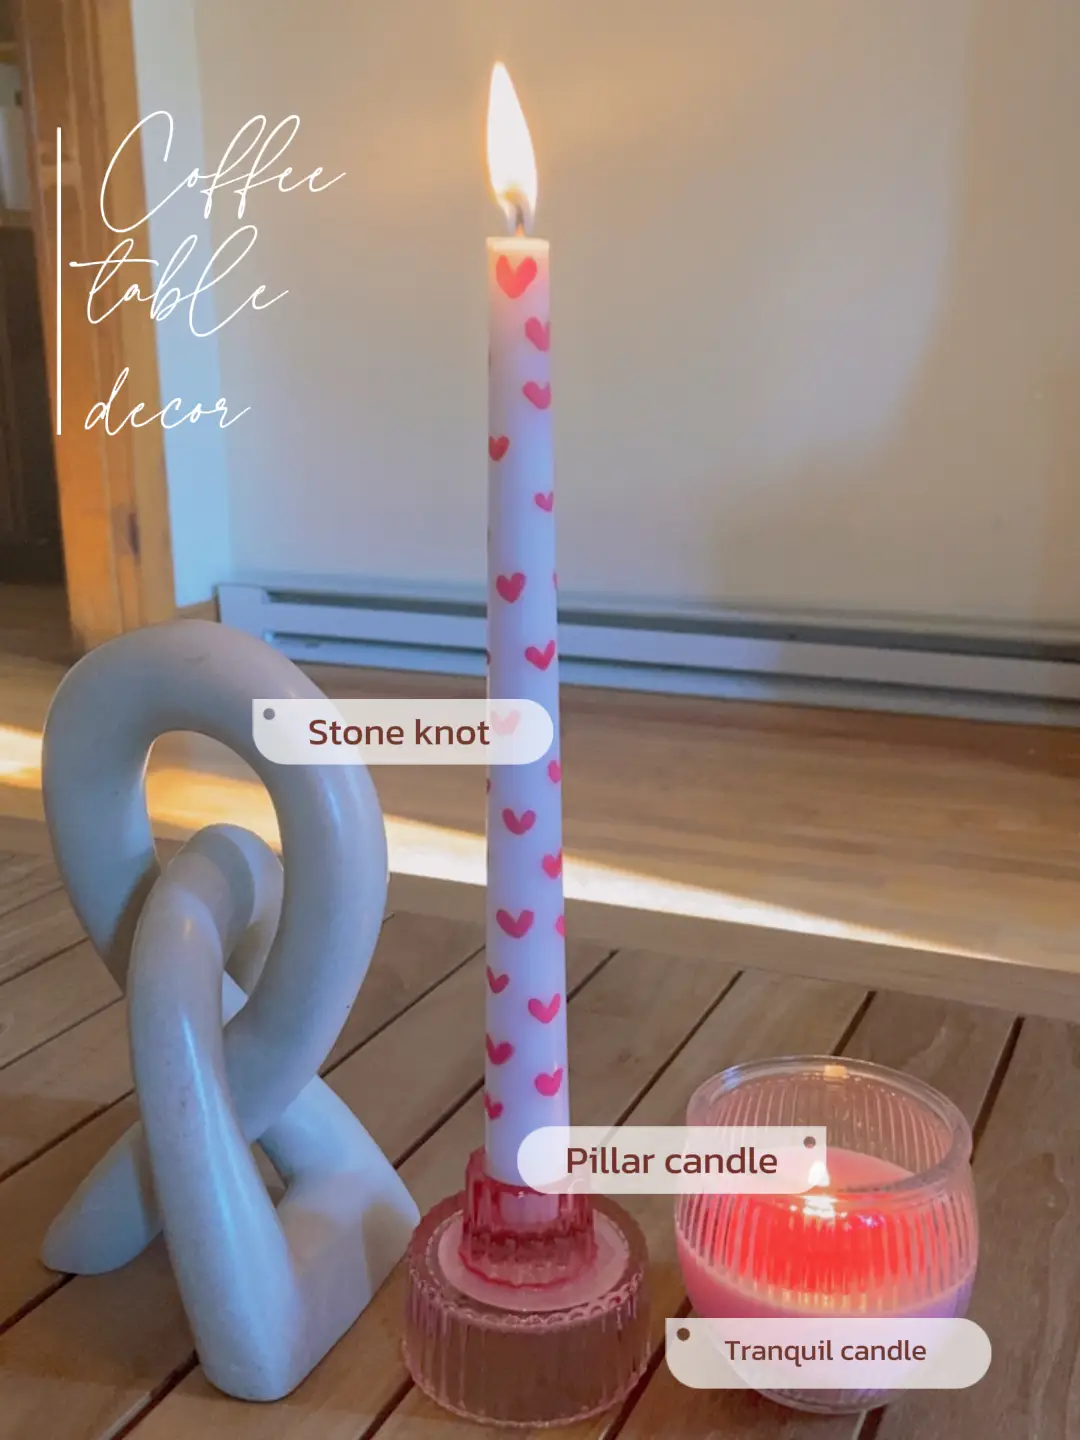 Candle Wax on a Glass Coffee Table? Follow These Easy Hacks